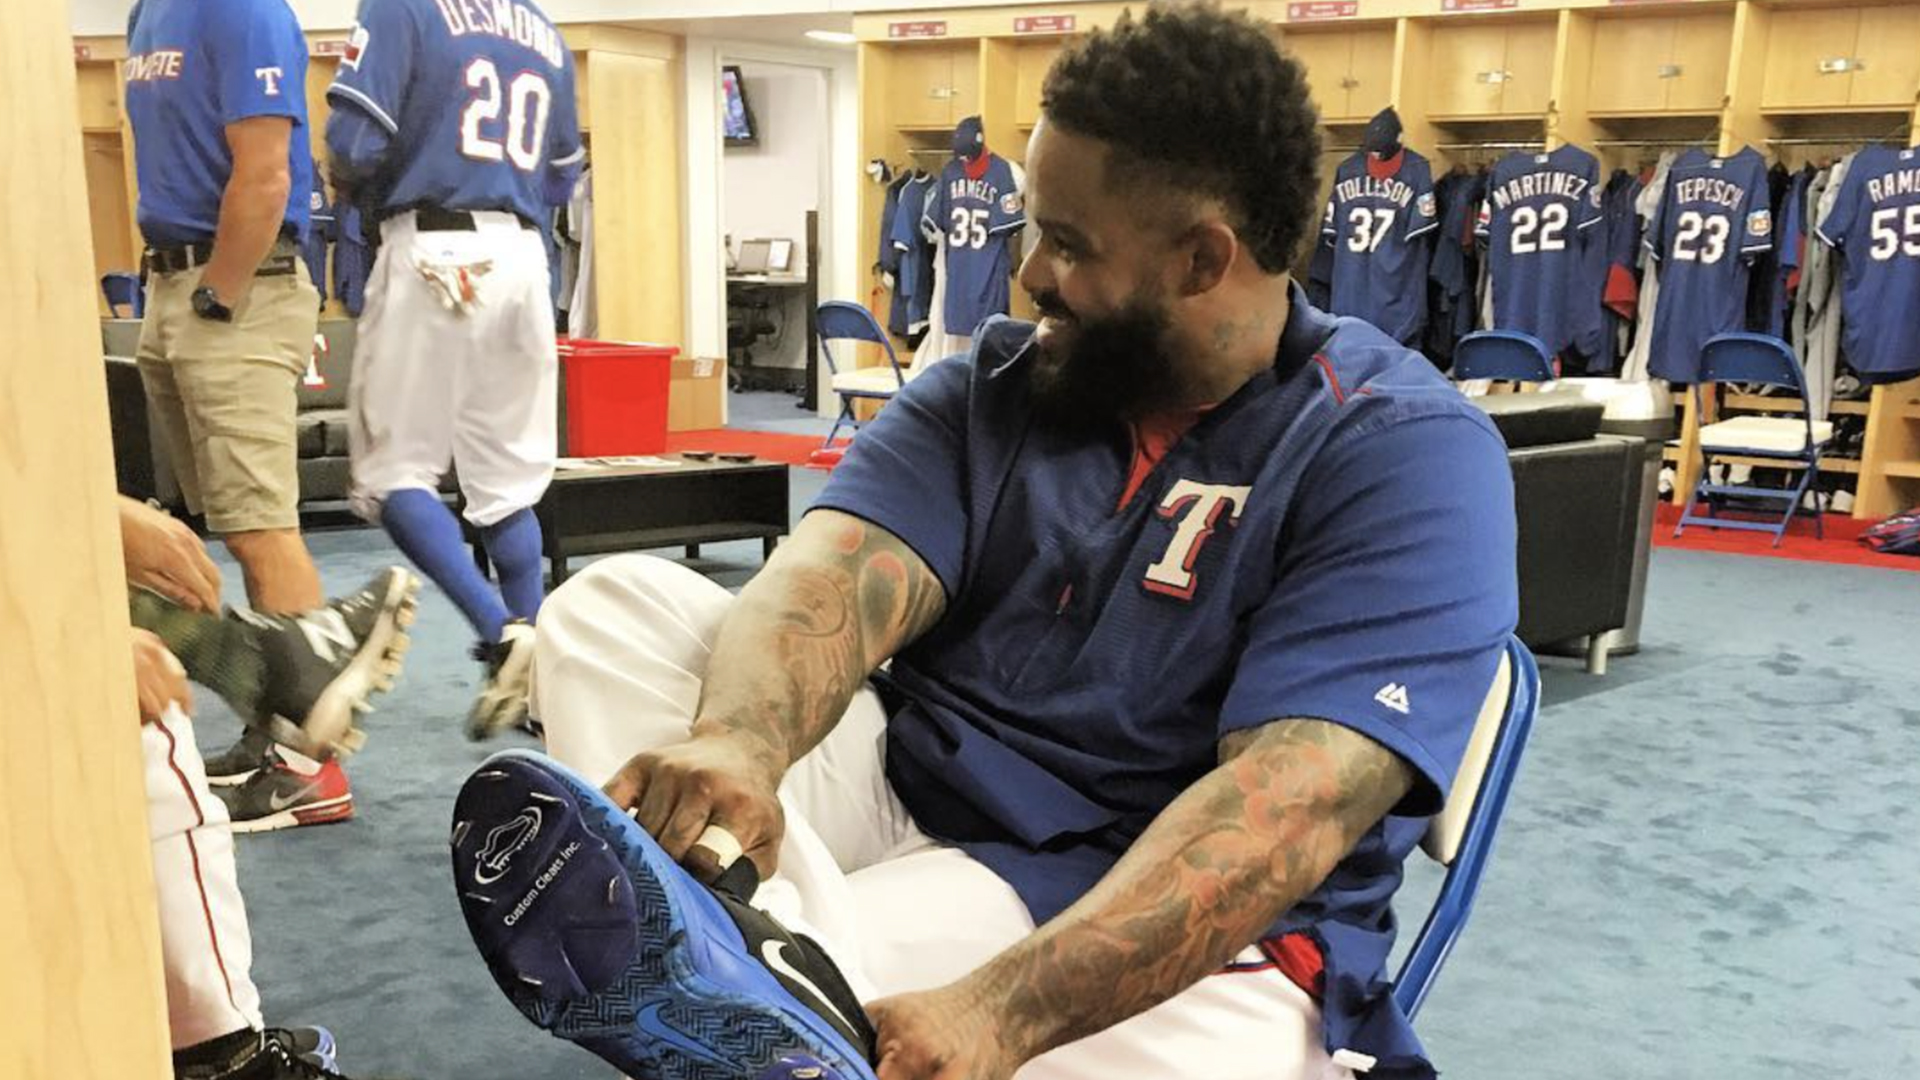 Prince and the paper: Fielder will be MLB's highest-paid player in 2020 -  BVM Sports